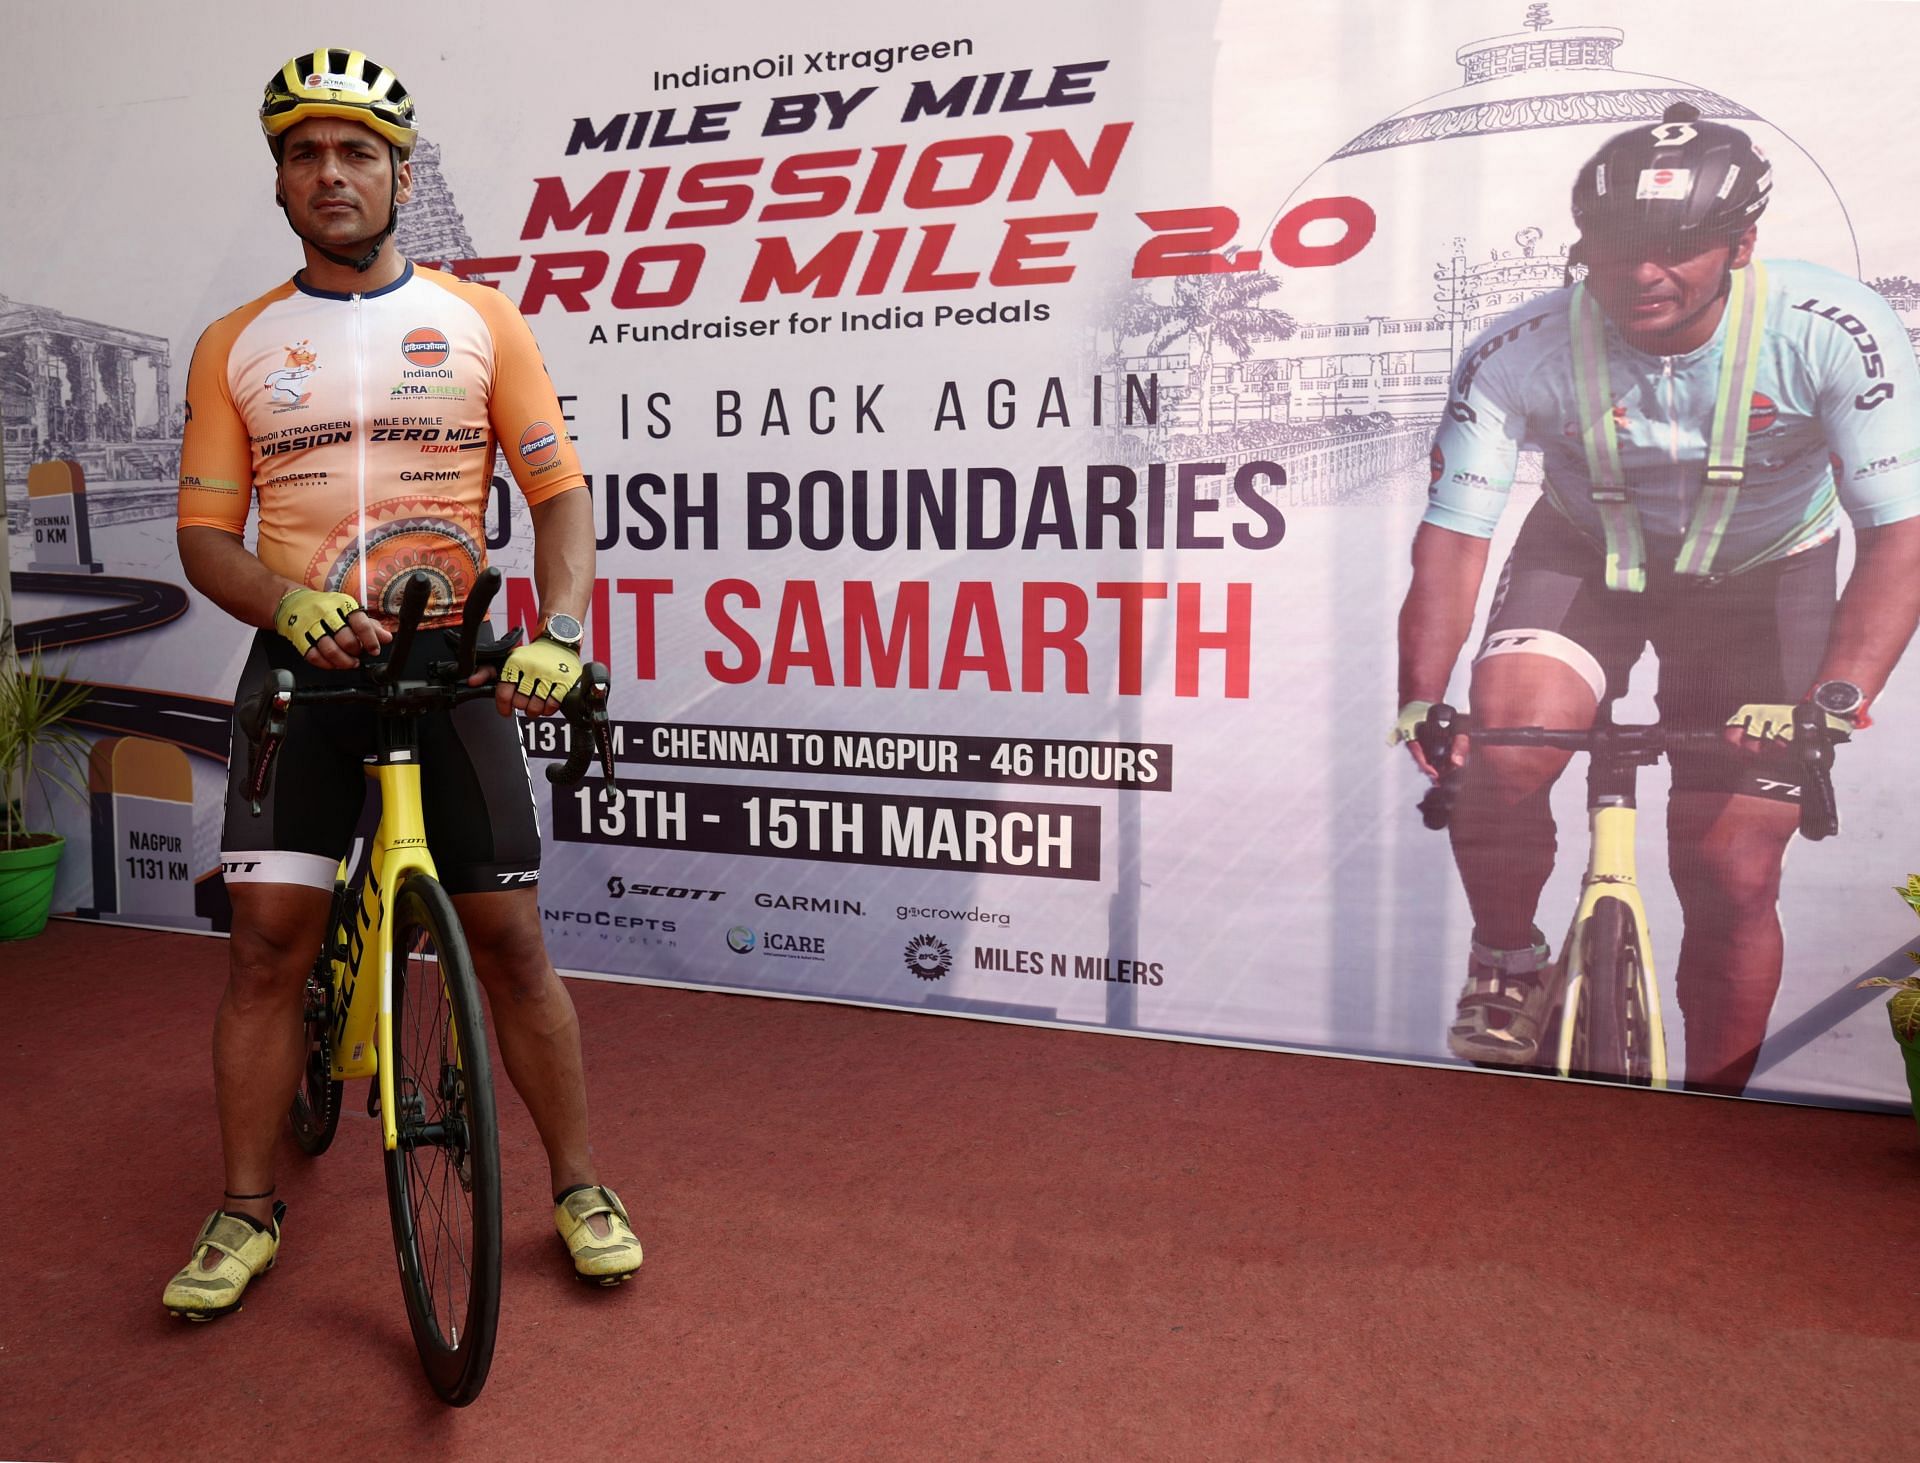 Dr Amit Samarth will attempt to cycle a world record 1131-km from Light House, Marina Beach, Chennai, to Zero Mile, Nagpur. (Pic credit: Team Samarth)